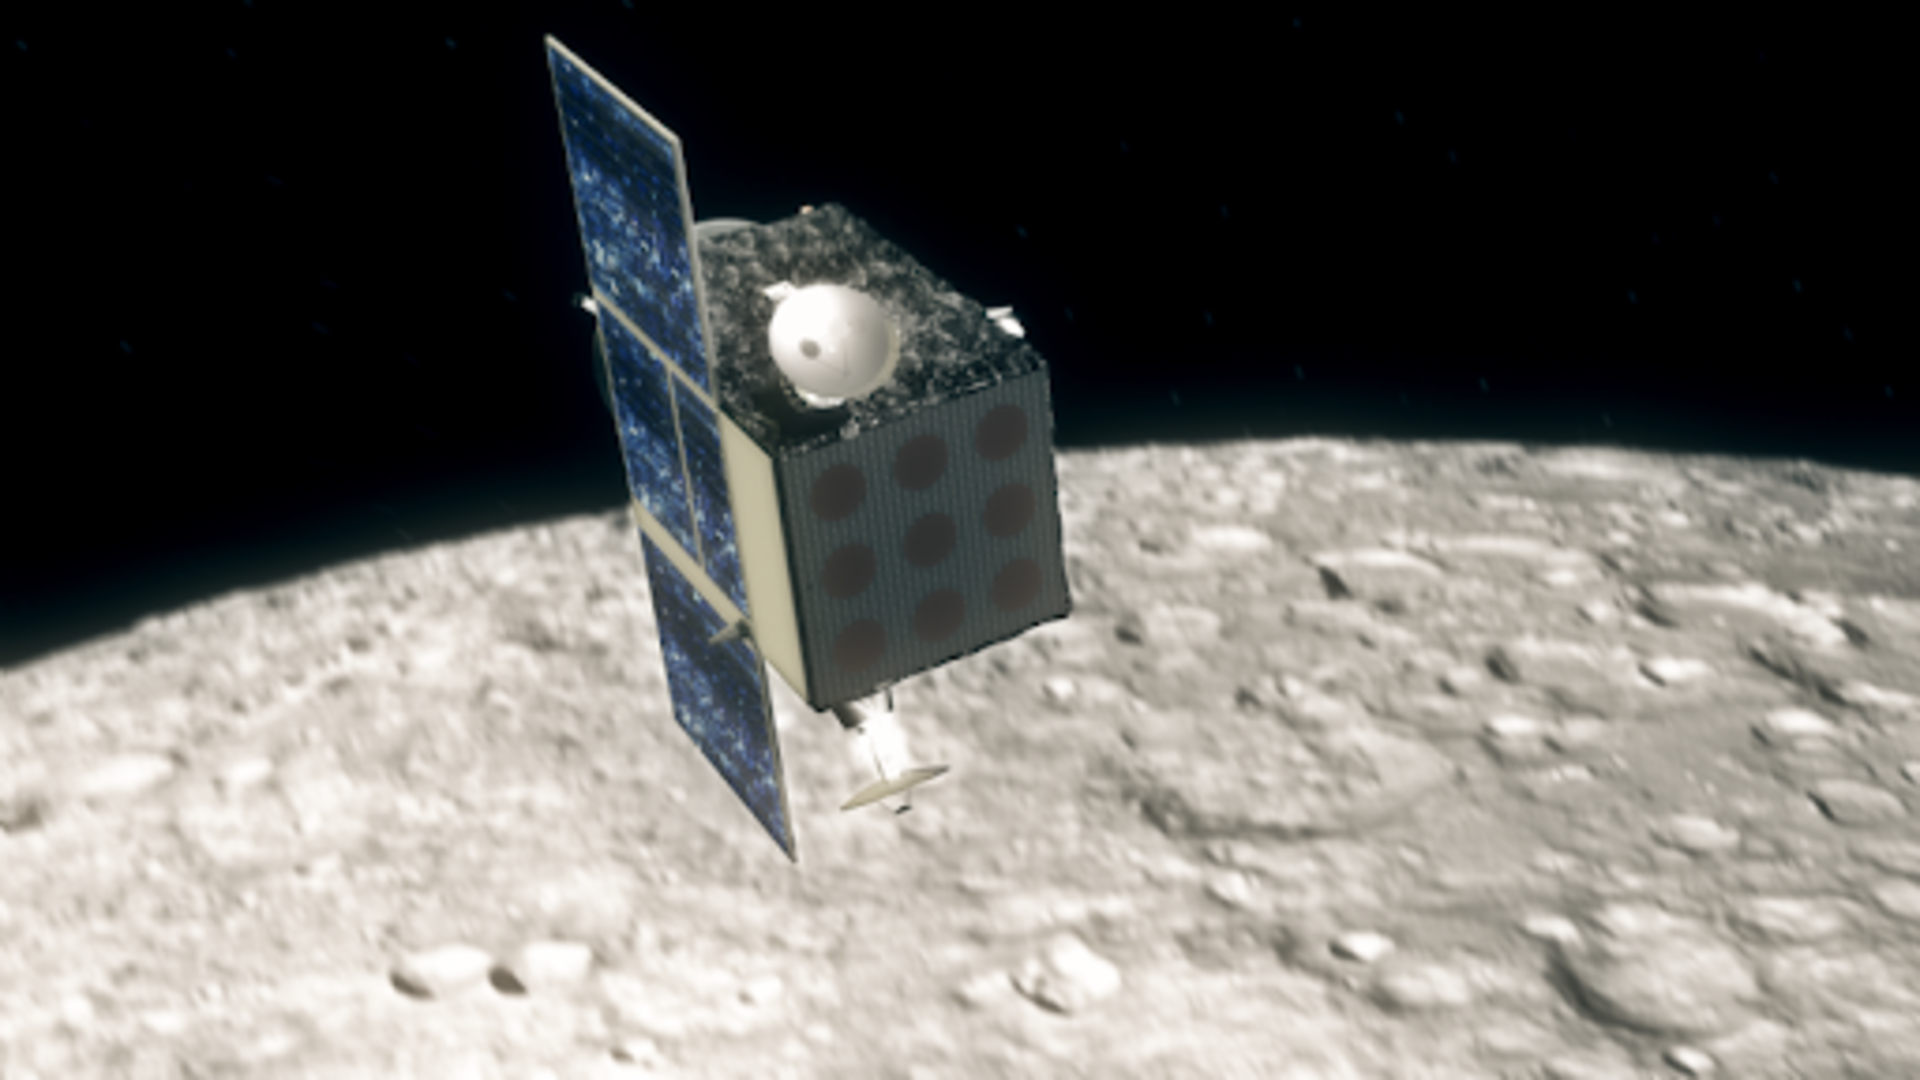 Lunar Pathfinder will focus coverage on the Moon's south pole